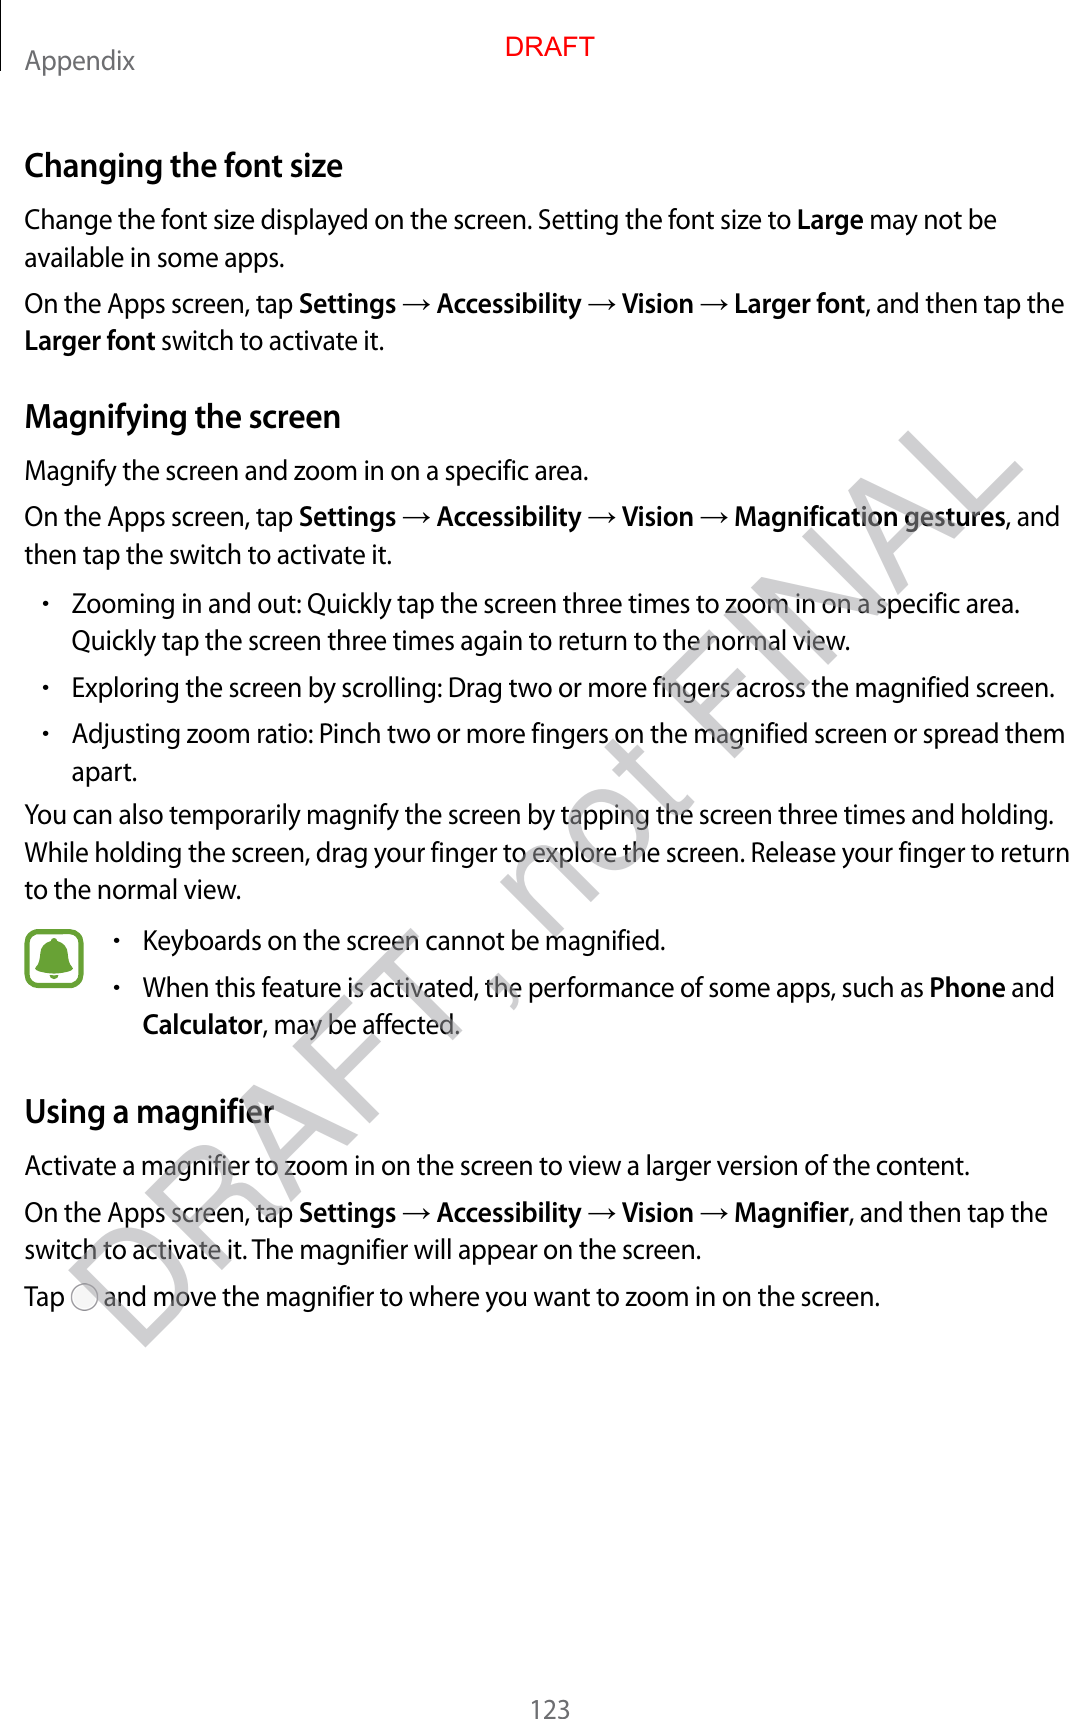 Appendix123Changing the font sizeChange the font size displayed on the screen. Setting the font size to Large may not be available in some apps.On the Apps screen, tap Settings  Accessibility  Vision  Larger font, and then tap the Larger font switch to activate it.Magnifying the screenMagnify the screen and zoom in on a specific area.On the Apps screen, tap Settings  Accessibility  Vision  Magnification gestures, and then tap the switch to activate it.•Zooming in and out: Quickly tap the screen three times to zoom in on a specific area. Quickly tap the screen three times again to return to the normal view.•Exploring the screen by scrolling: Drag two or more fingers across the magnified screen.•Adjusting zoom ratio: Pinch two or more fingers on the magnified screen or spread them apart.You can also temporarily magnify the screen by tapping the screen three times and holding. While holding the screen, drag your finger to explore the screen. Release your finger to return to the normal view.•Keyboards on the screen cannot be magnified.•When this feature is activated, the performance of some apps, such as Phone and Calculator, may be affected.Using a magnifierActivate a magnifier to zoom in on the screen to view a larger version of the content.On the Apps screen, tap Settings  Accessibility  Vision  Magnifier, and then tap the switch to activate it. The magnifier will appear on the screen.Tap   and move the magnifier to where you want to zoom in on the screen.DRAFTDRAFT, not FINAL